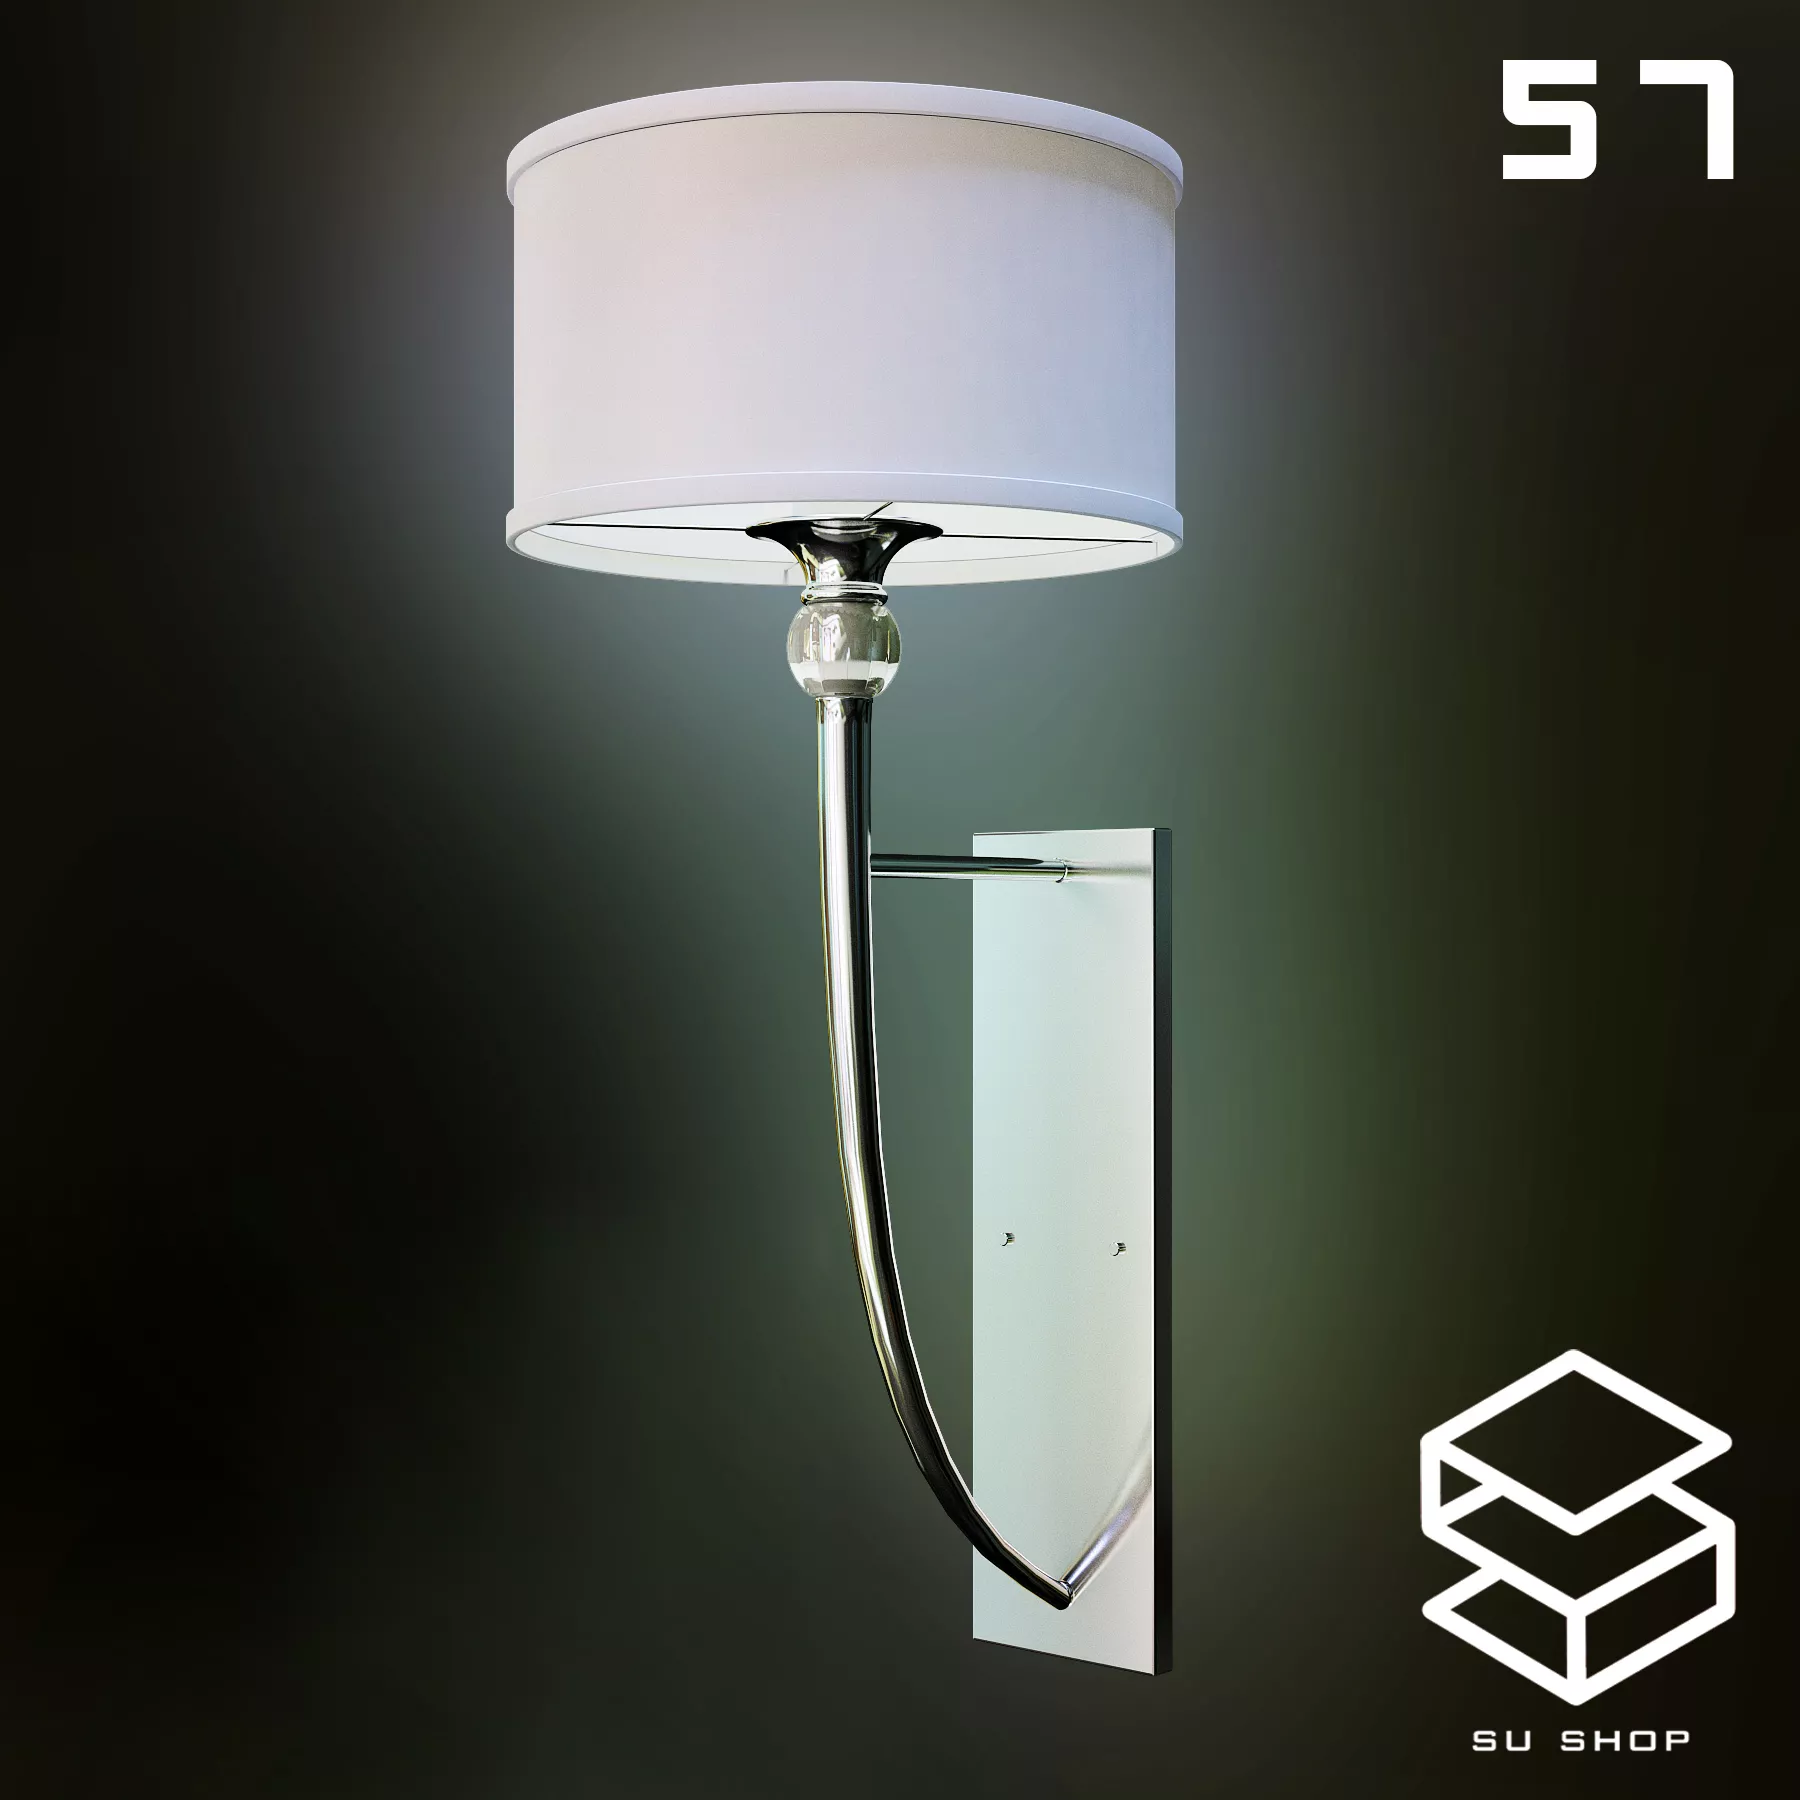 MODERN WALL LAMP - SKETCHUP 3D MODEL - VRAY OR ENSCAPE - ID16311